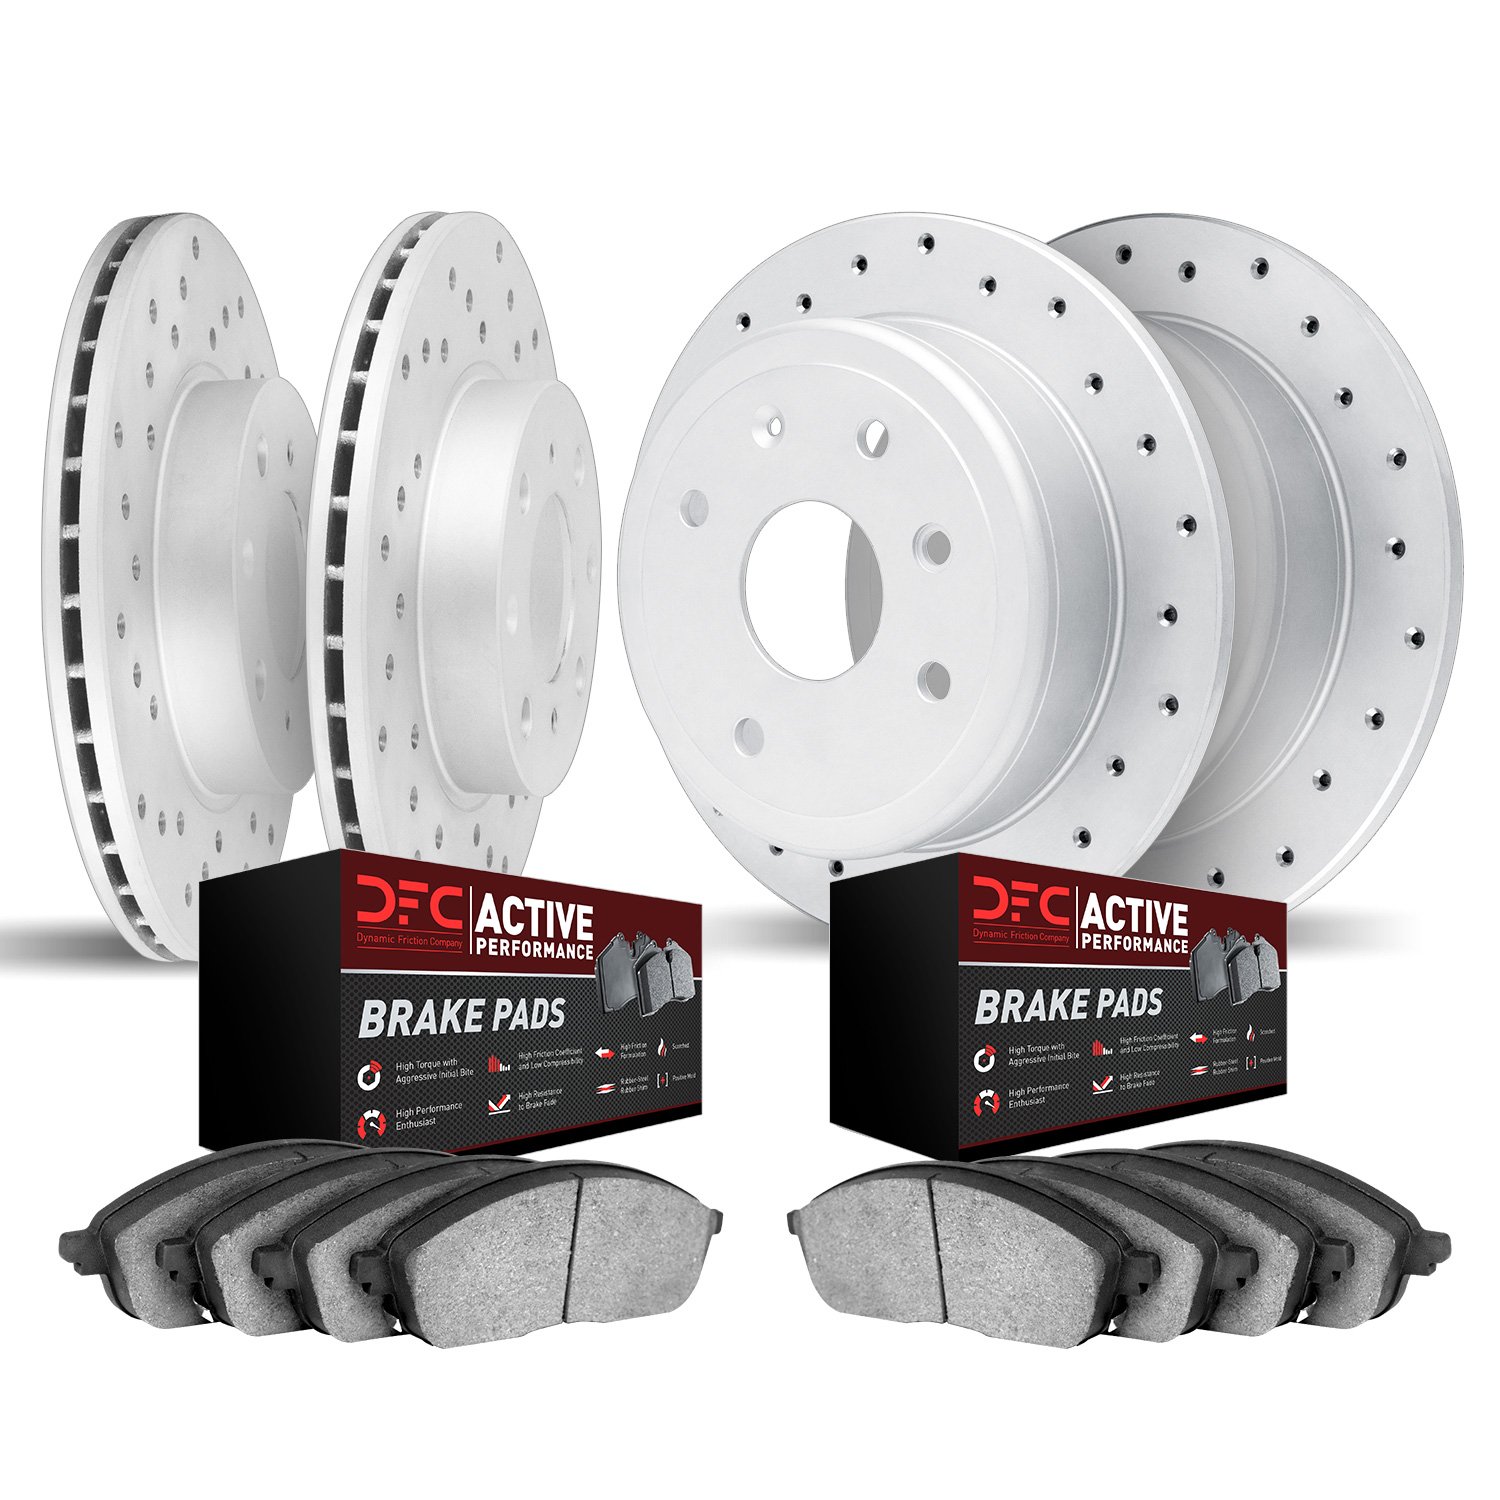 2704-31000 Geoperformance Drilled Brake Rotors with Active Performance Pads Kit, 1984-1991 BMW, Position: Front and Rear